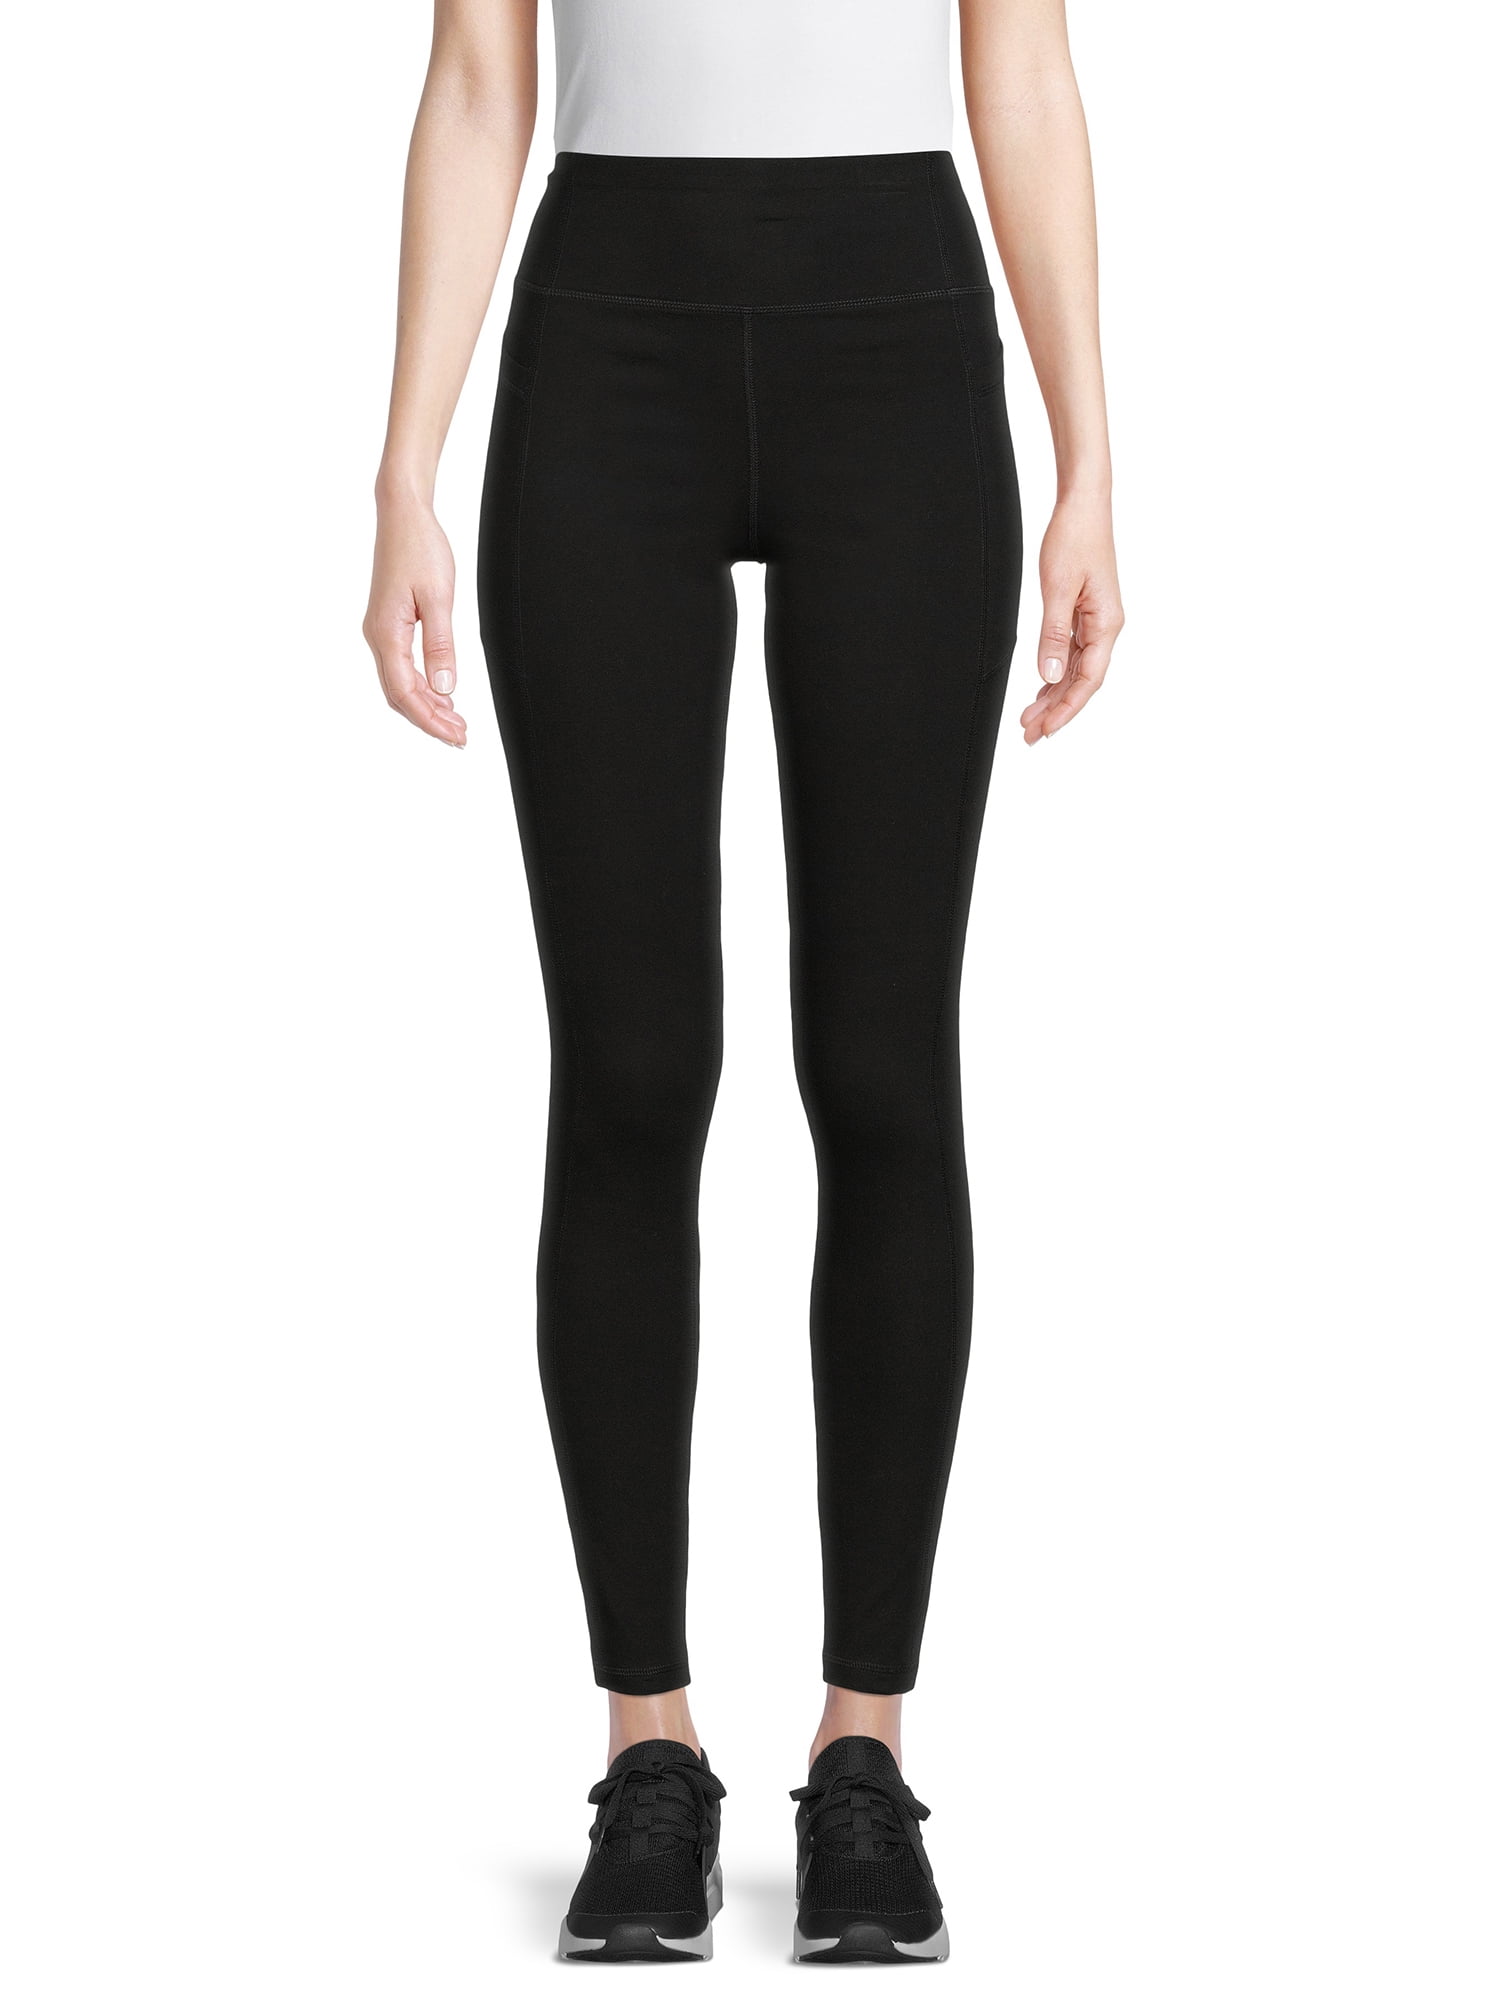 Ansley Luxe Cotton Leggings with Pockets PLUS  Leggings are not pants, Cotton  leggings, Quality leggings